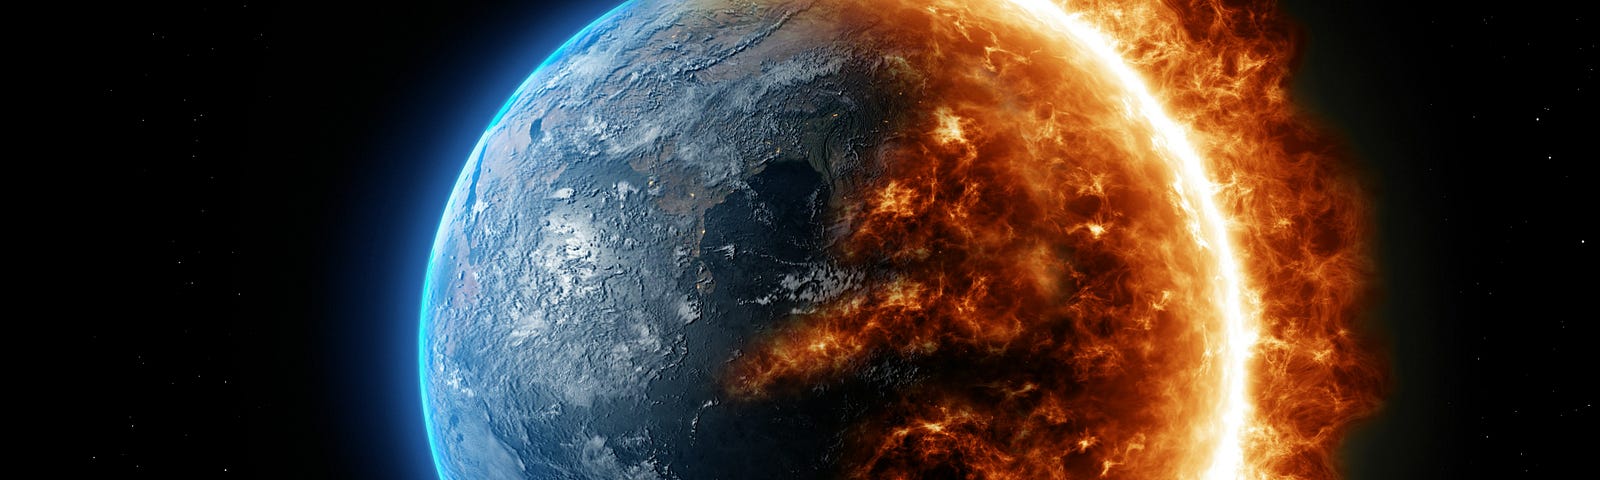 Half of the Earth is on fire.